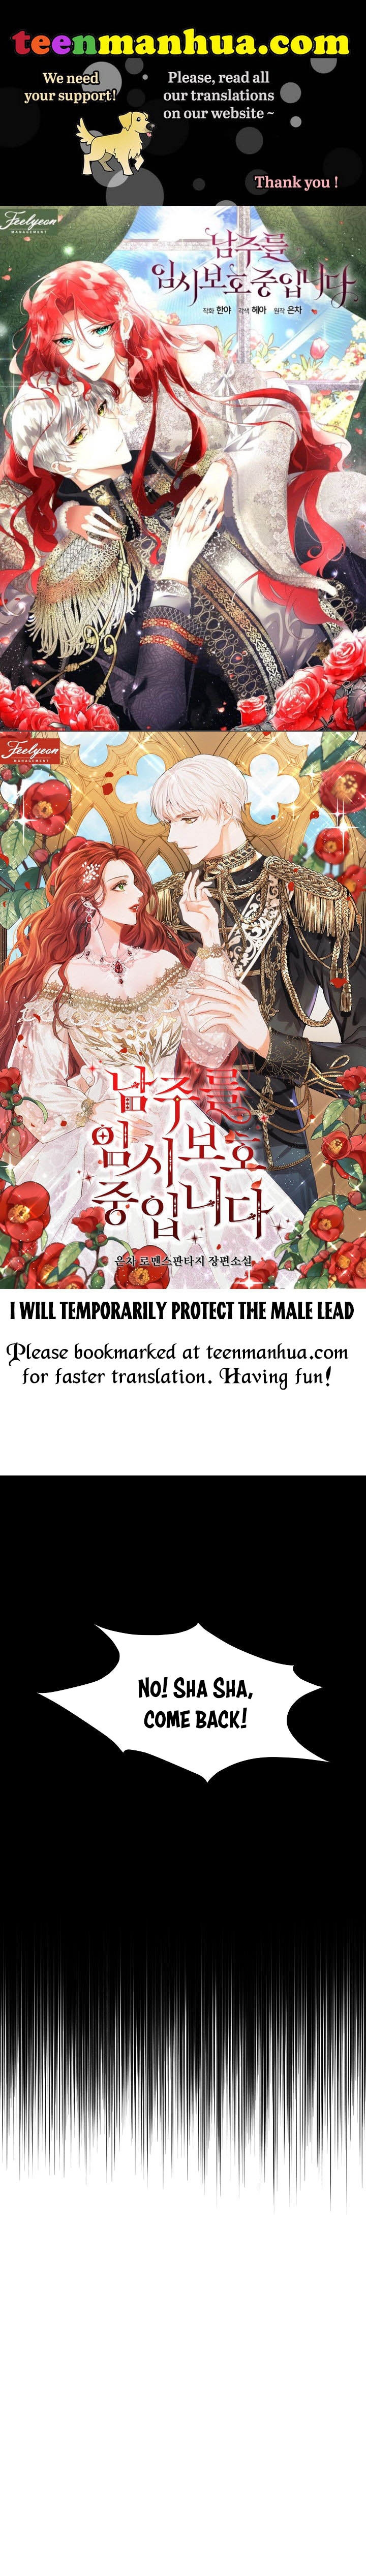 I will temporarily protect the male lead Chapter 8